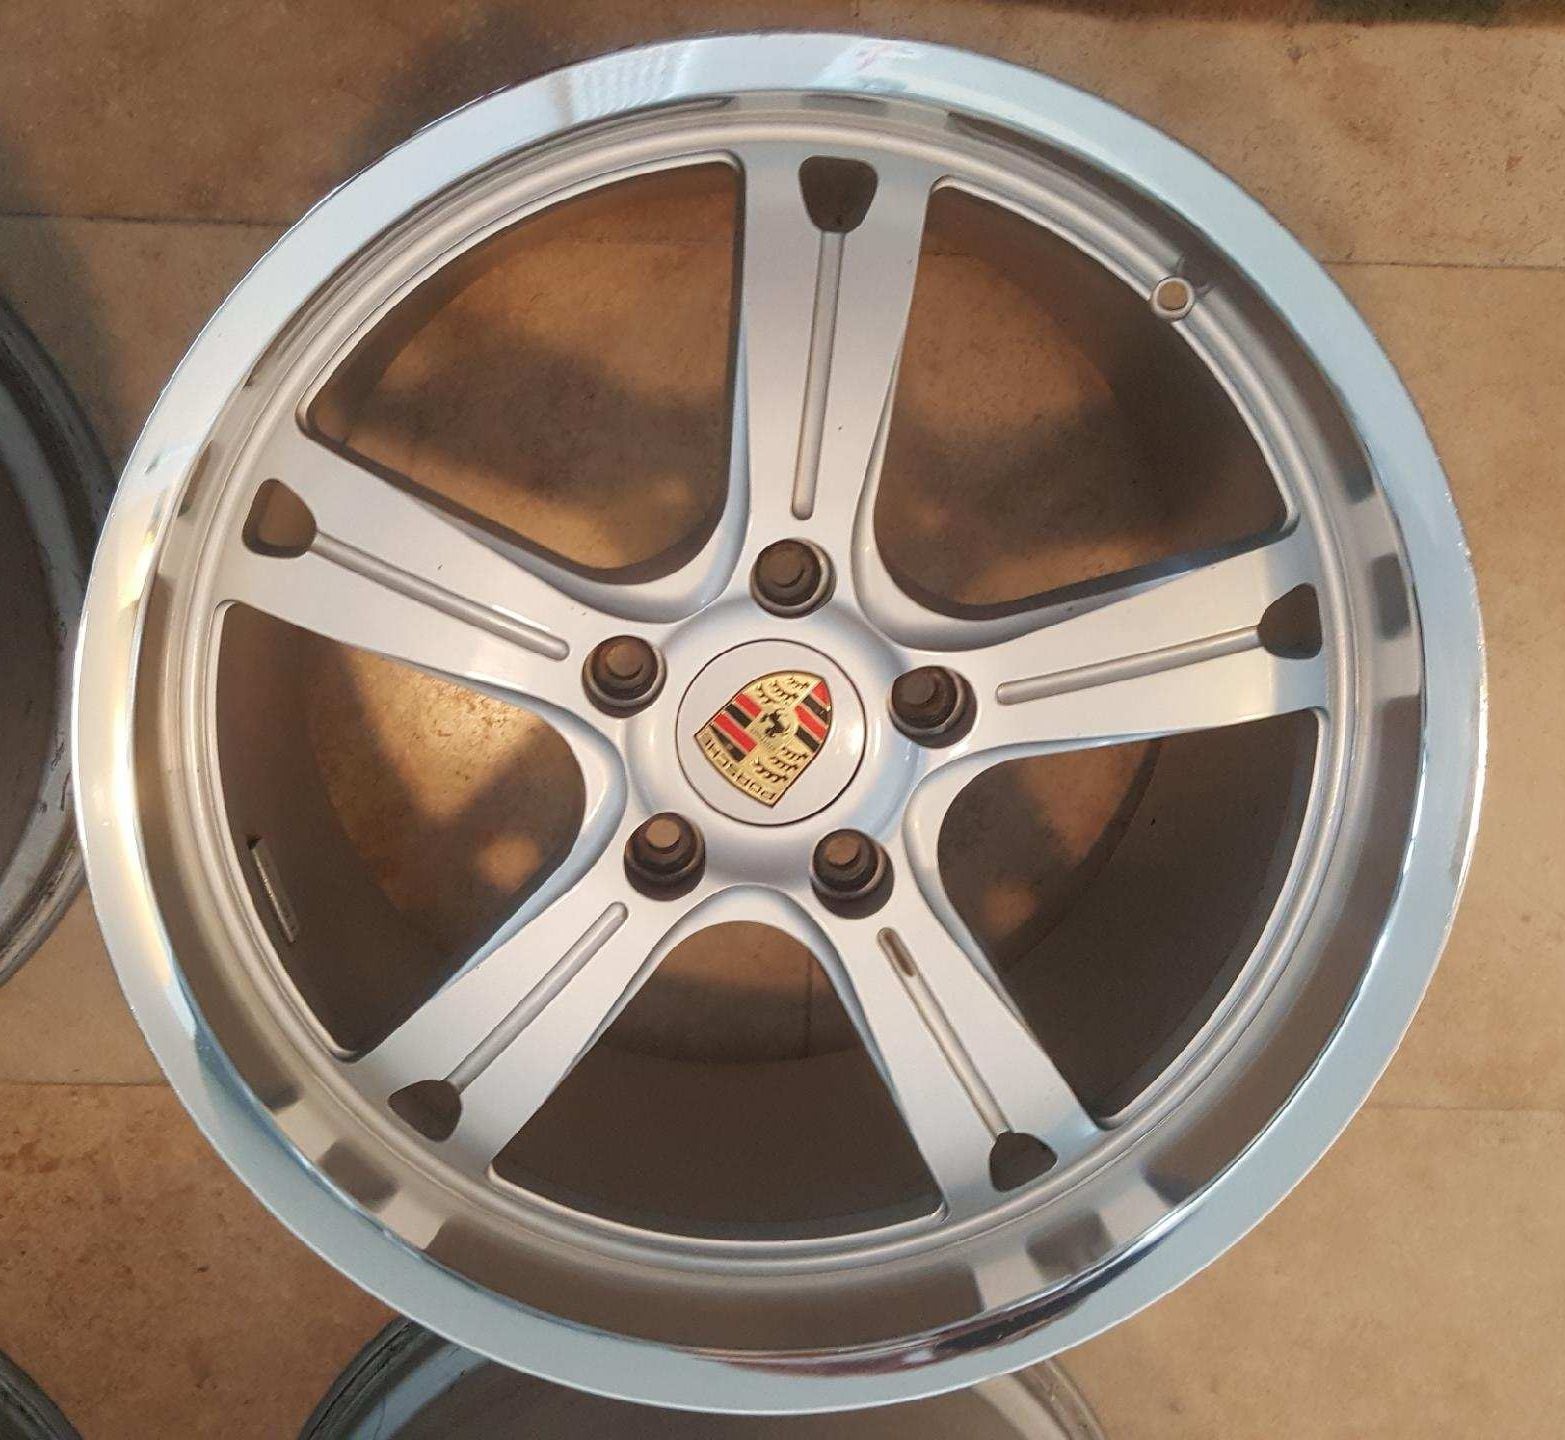 Wheels and Tires/Axles - CHAMPION RS97 LIGHTWEIGHT NARROW BODY WHEELS 19X11.5 AND 19X8.5 - Used - 1999 to 2019 Porsche 911 - Treasure Island, FL 33706, United States